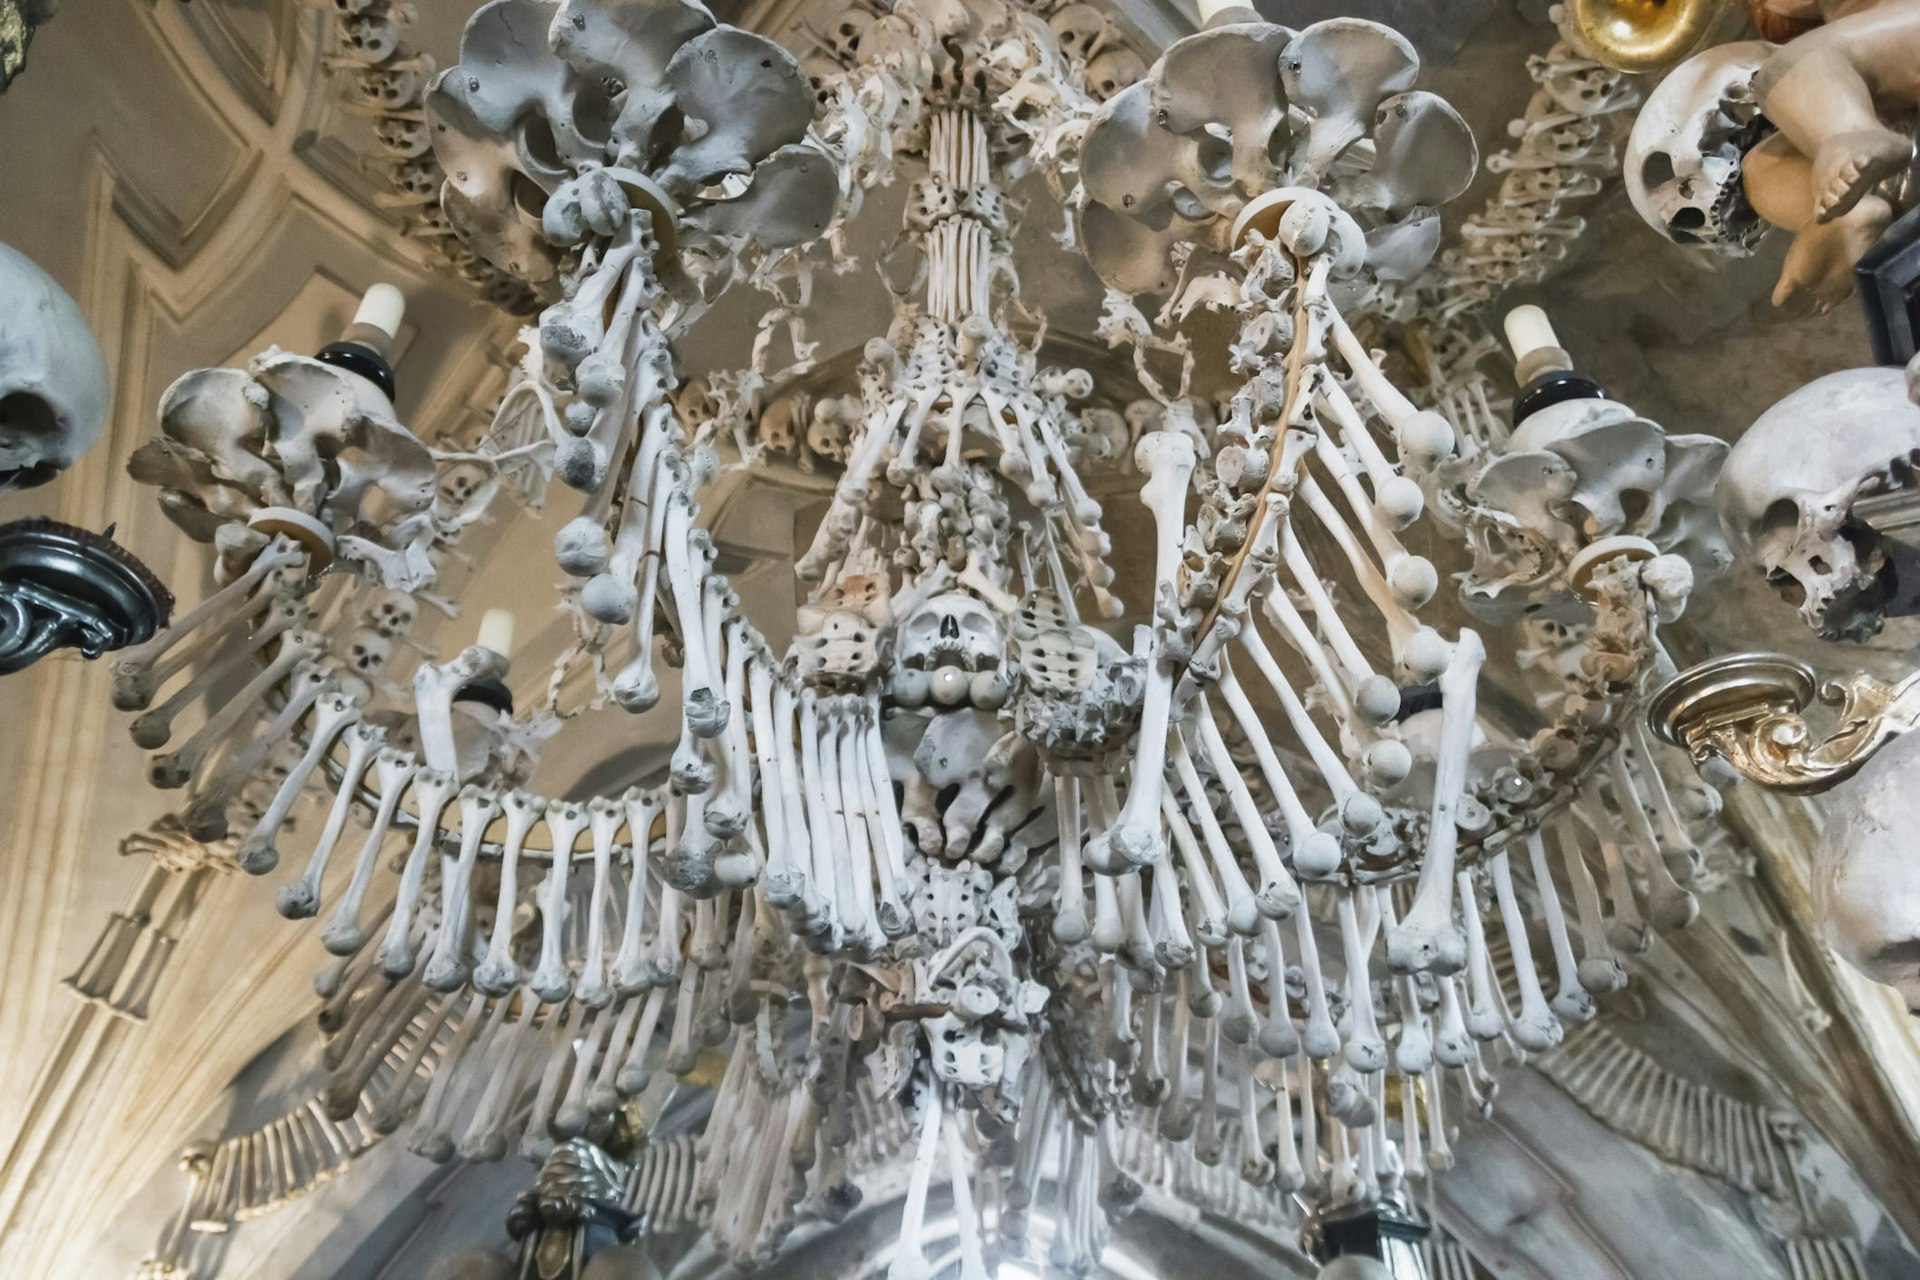 Ossuary interior decoration with human bones and skulls at the Kostnice Church in Kutna Hora, Czech Republic.